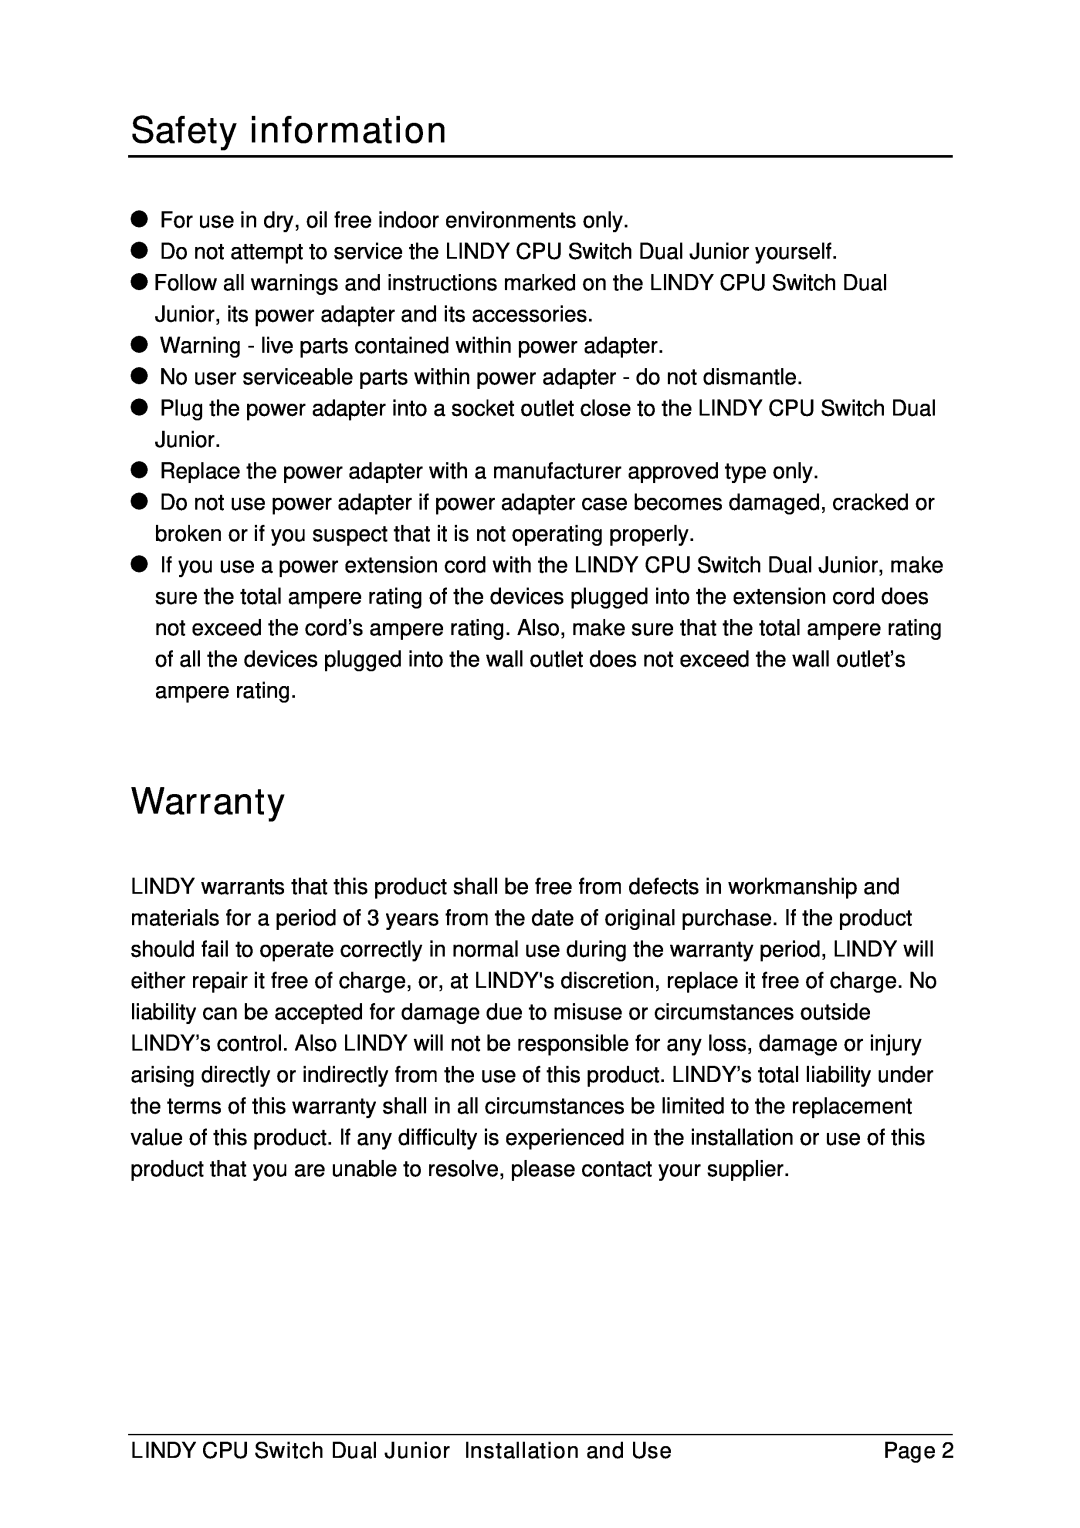 Lindy 32351, 32352 manual Safety information, Warranty, LINDY CPU Switch Dual Junior Installation and Use, Page 